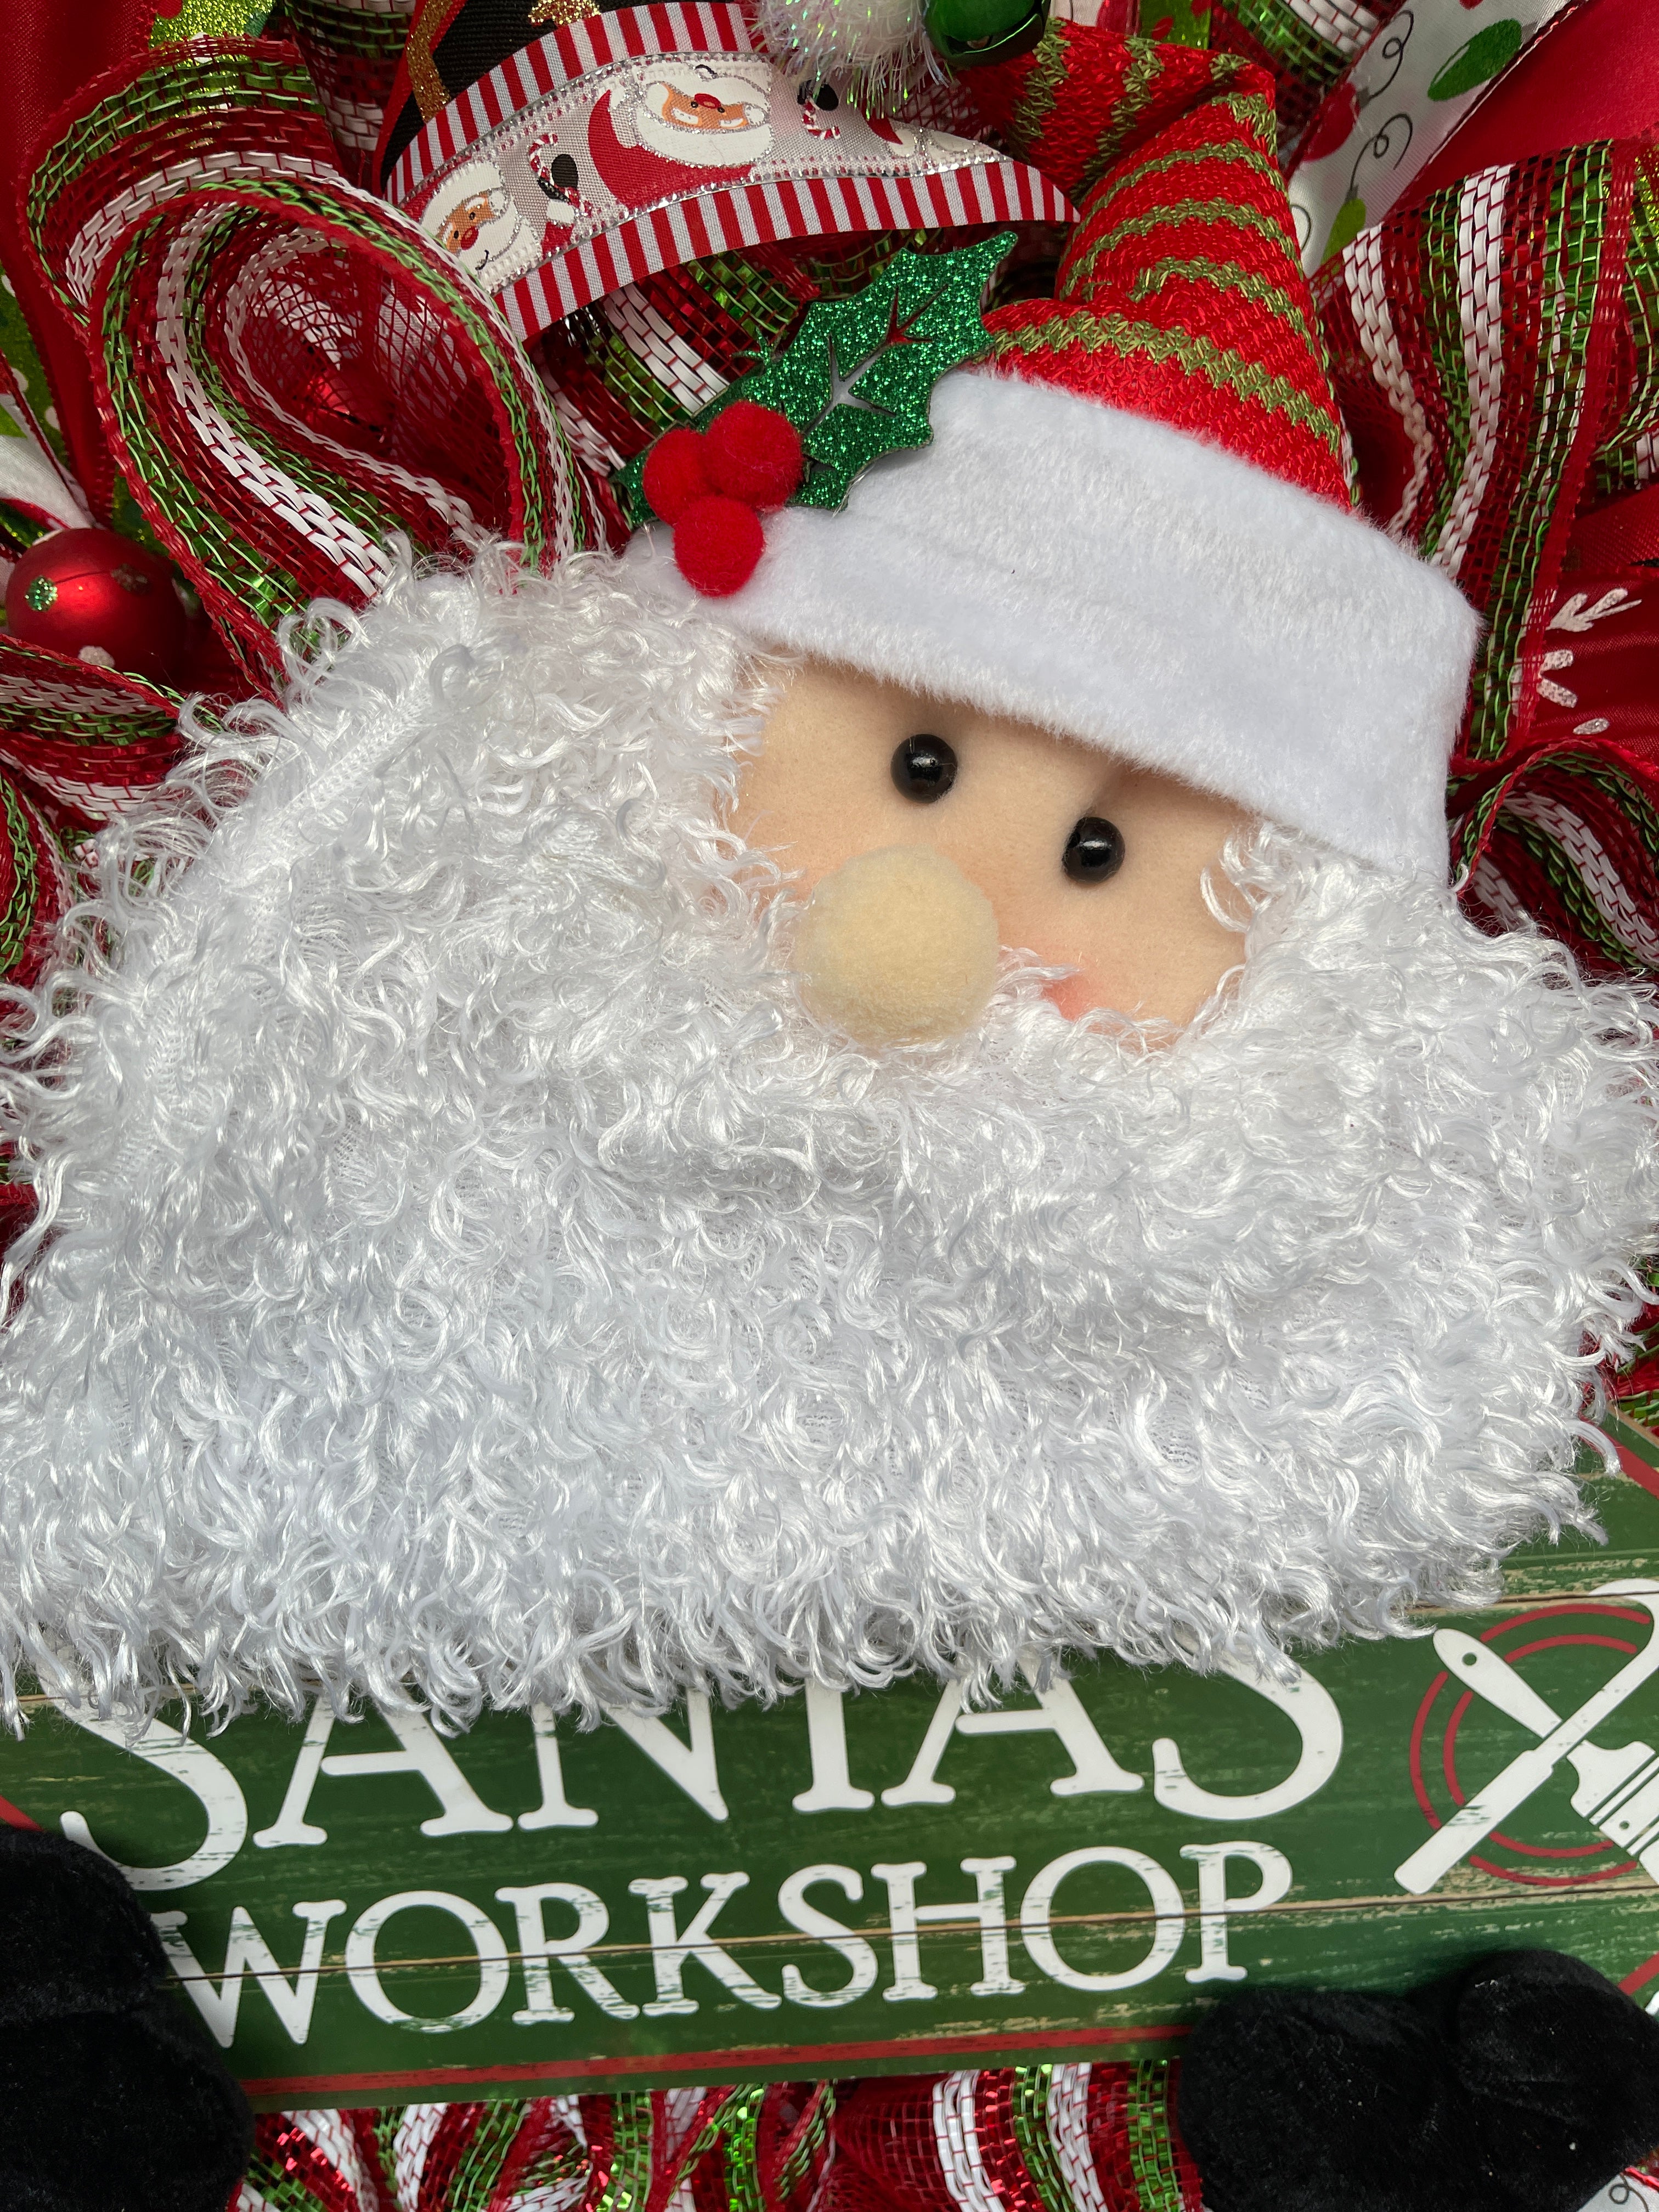 Close Up of Santa Claus Plush Face with White Beard holding a Santa's Workshop Sign